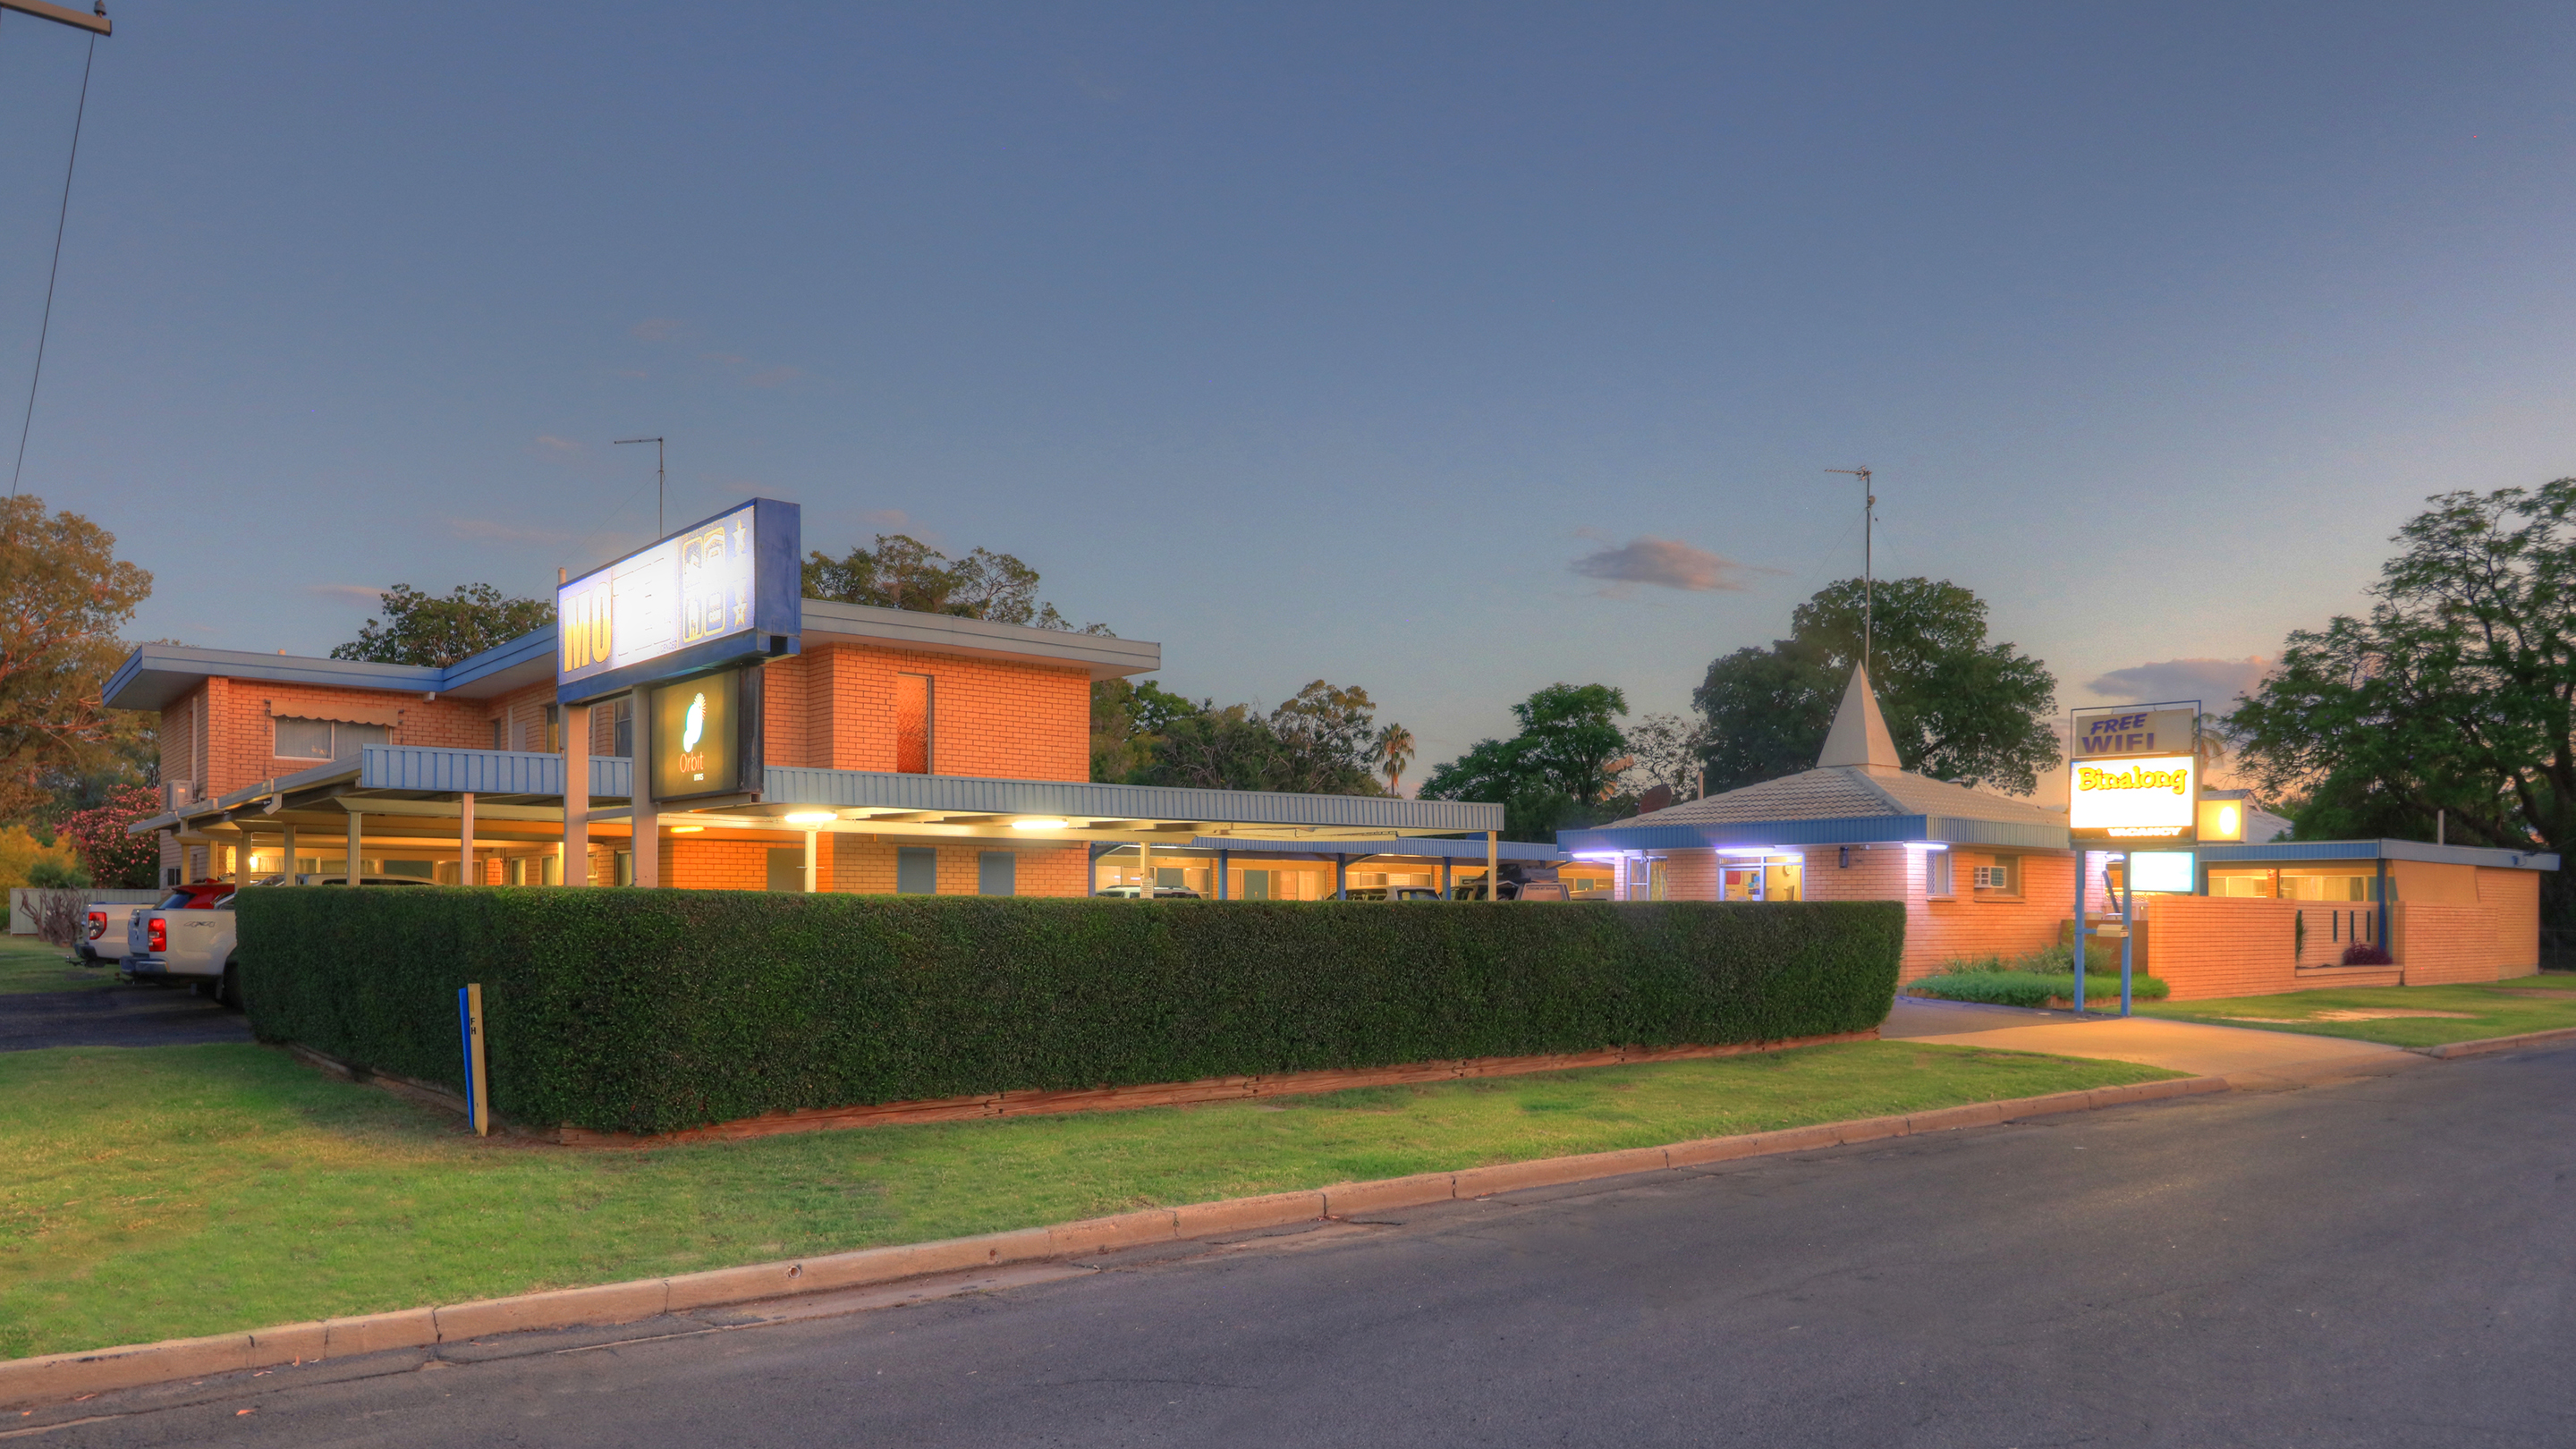 The Binalong Motel is a short 5 minute walk from the CBD making it a quiet, peaceful place to rest.  - Goondiwindi - QLD